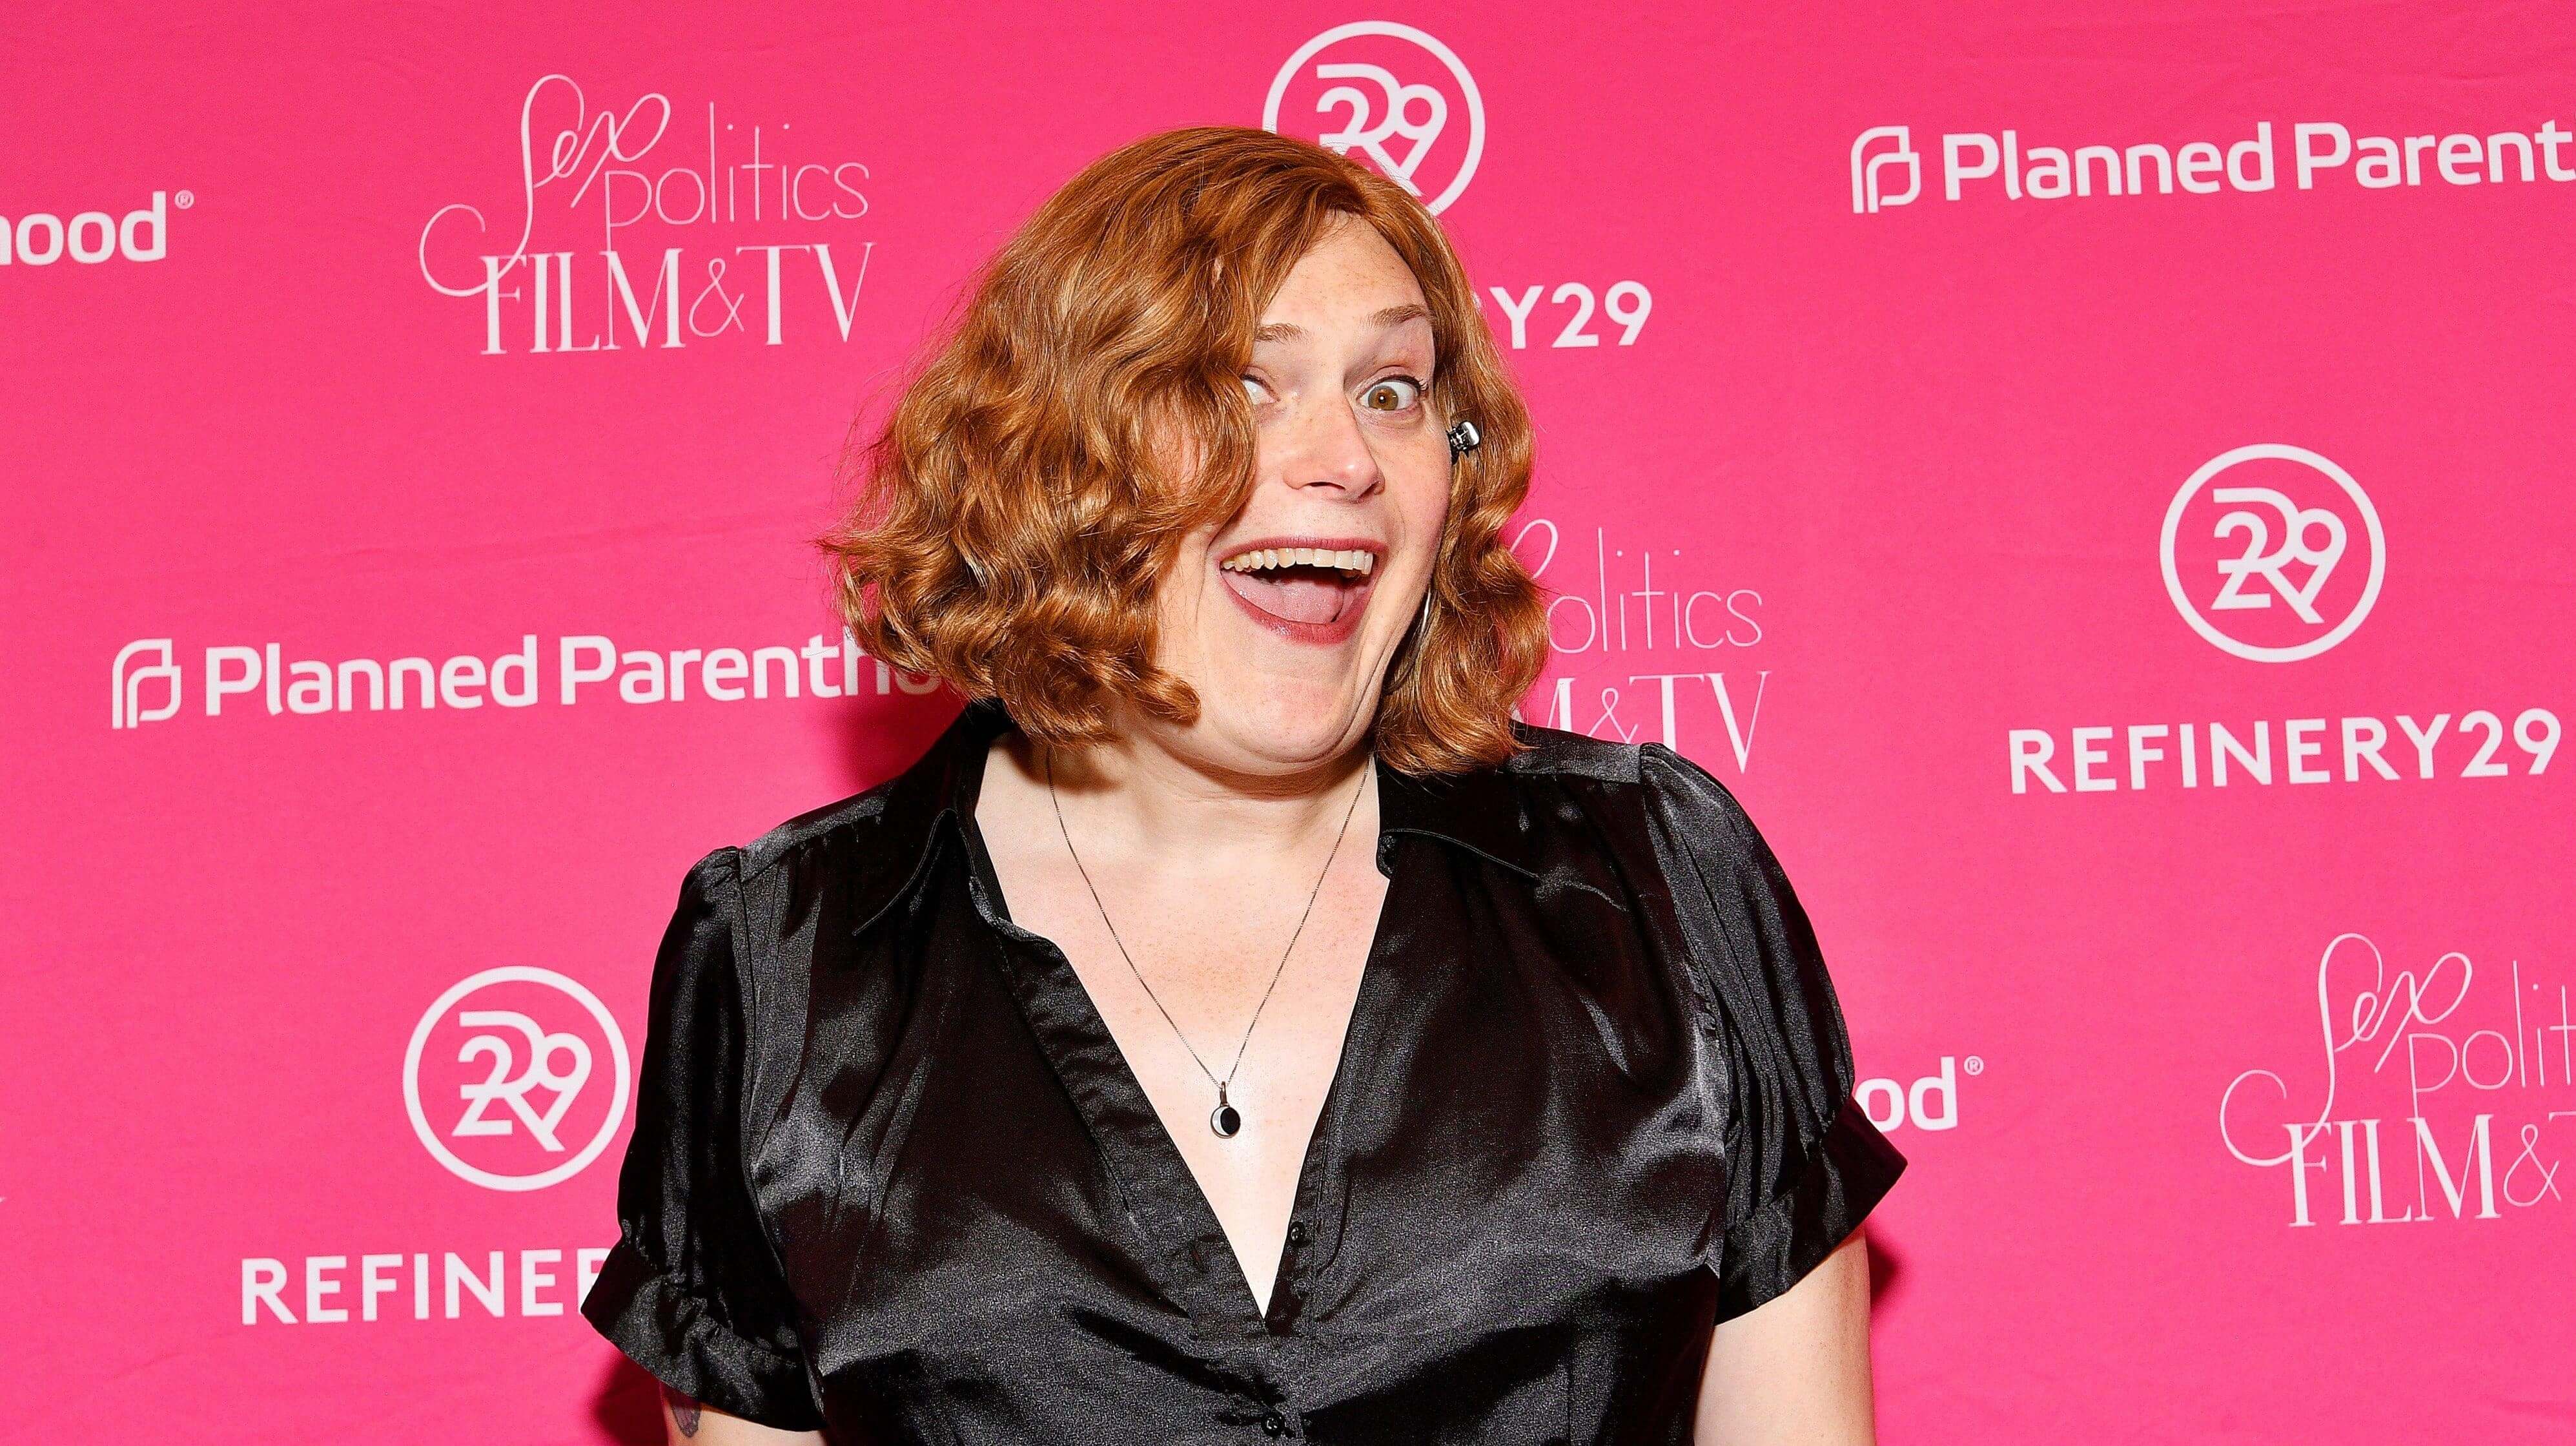 Lilly Wachowski to make solo feature directing debut